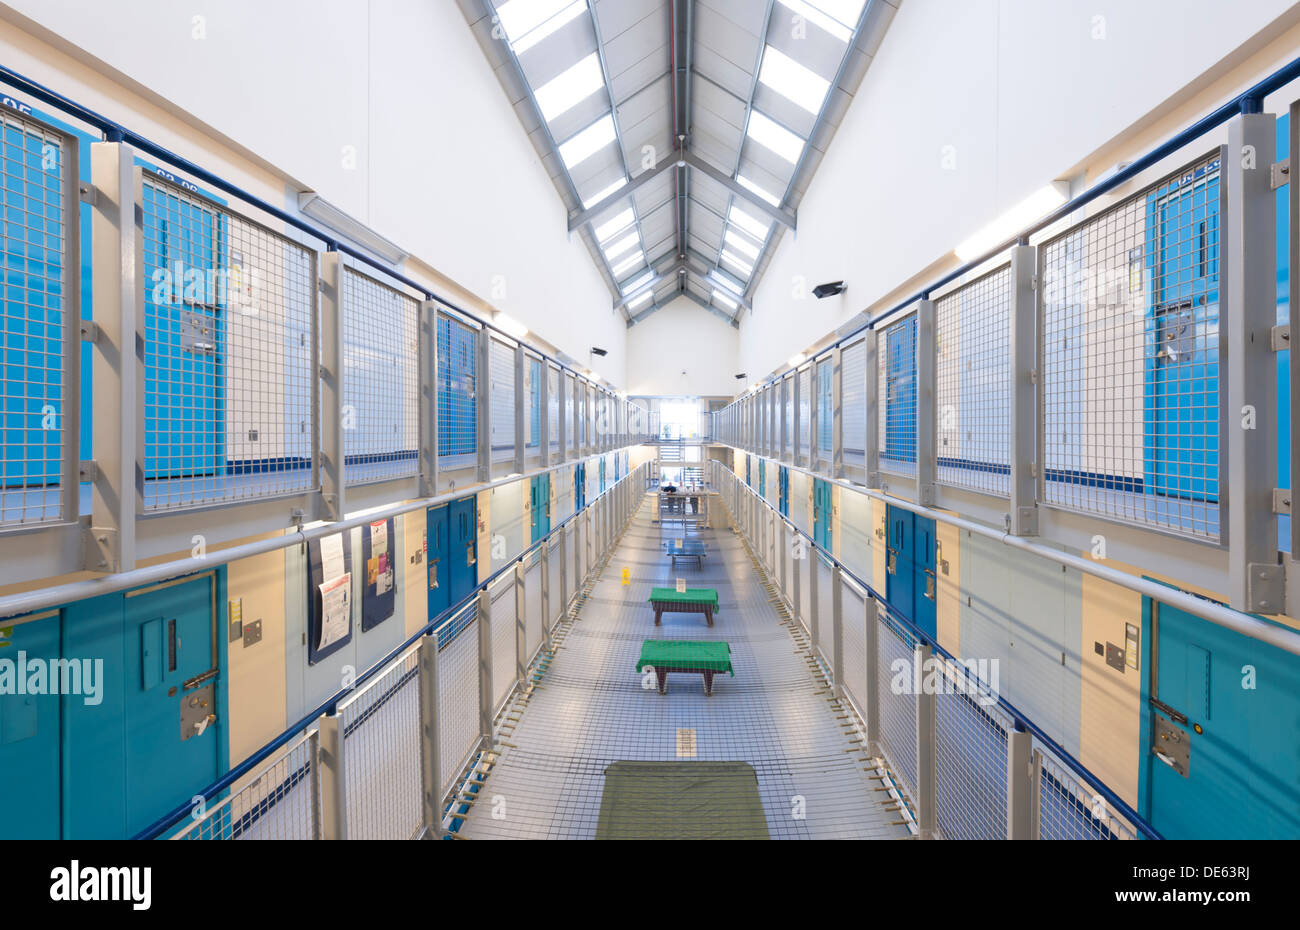 The interior of one of Her Majesty's Prison cell blocks in Lancashire in the UK. Stock Photo